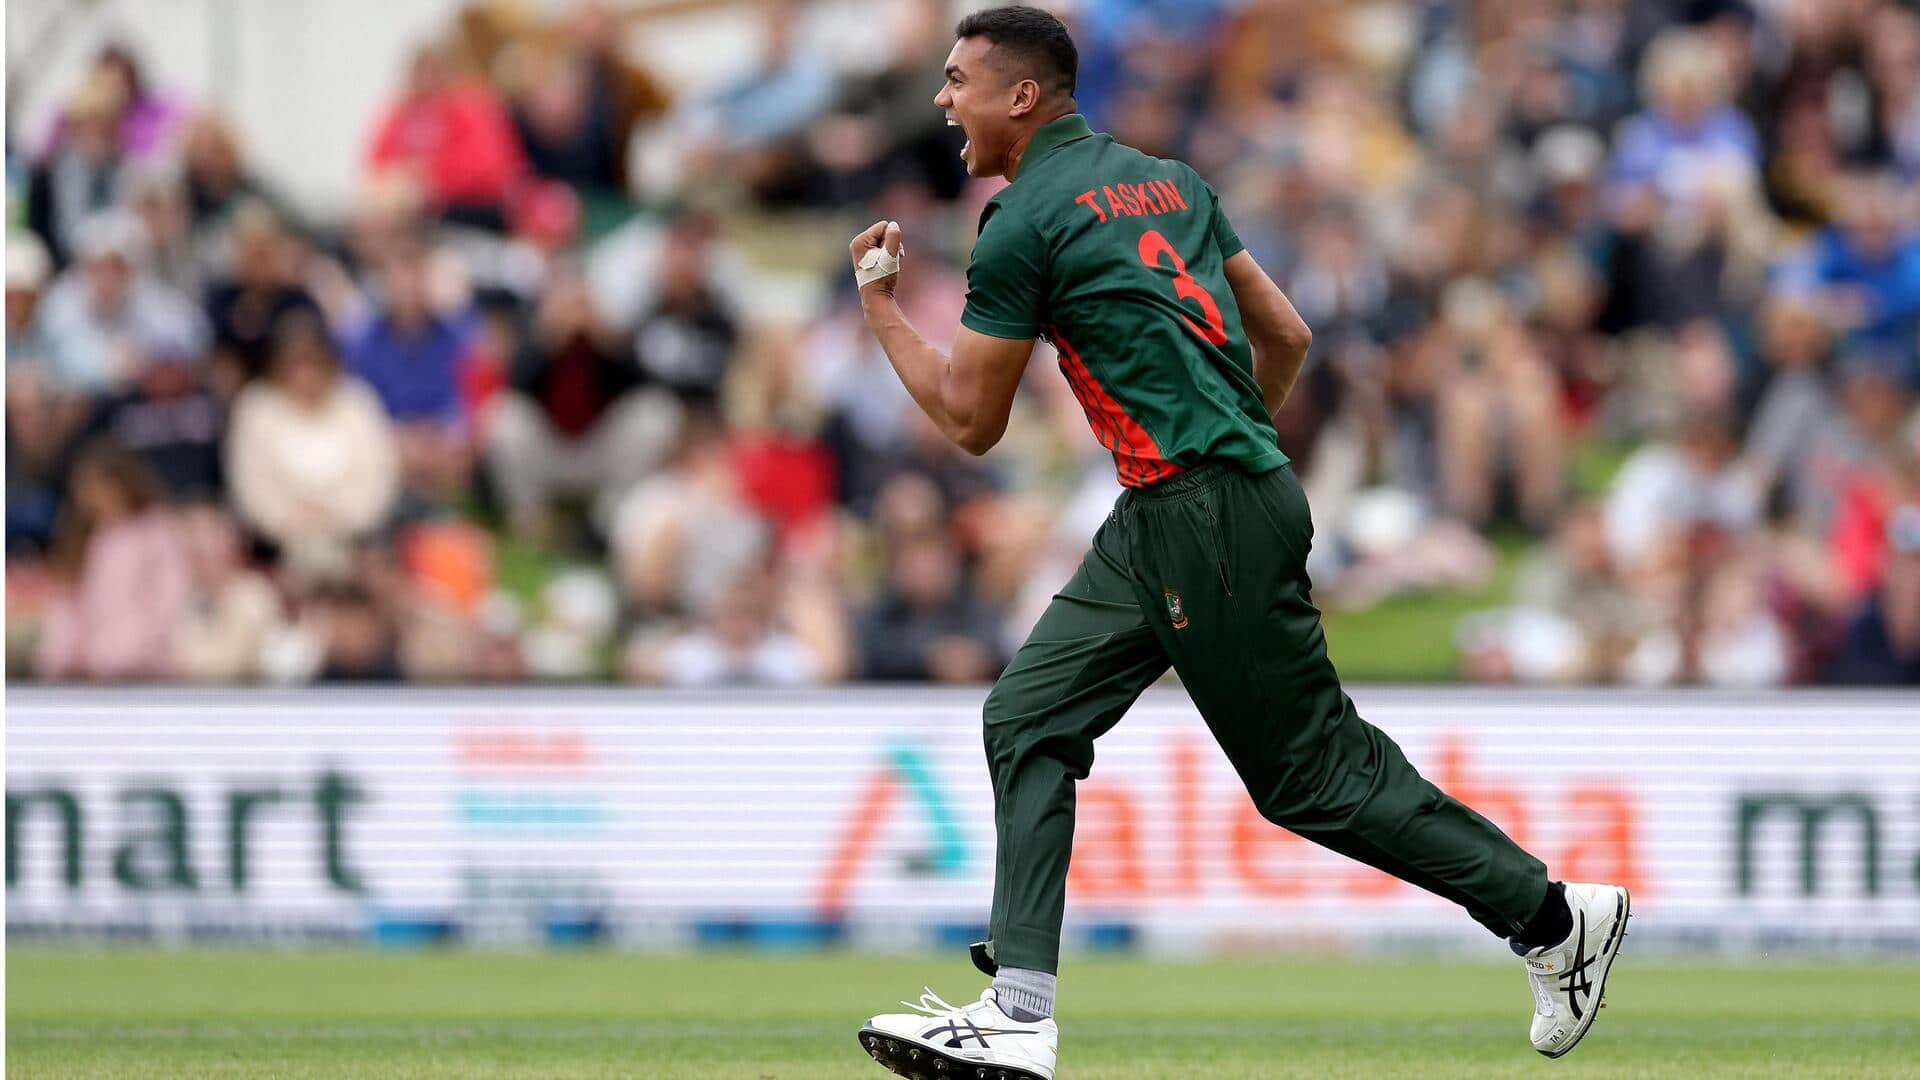 Bangladesh's Taskin Ahmed completes 100 ODI wickets: Decoding his stats